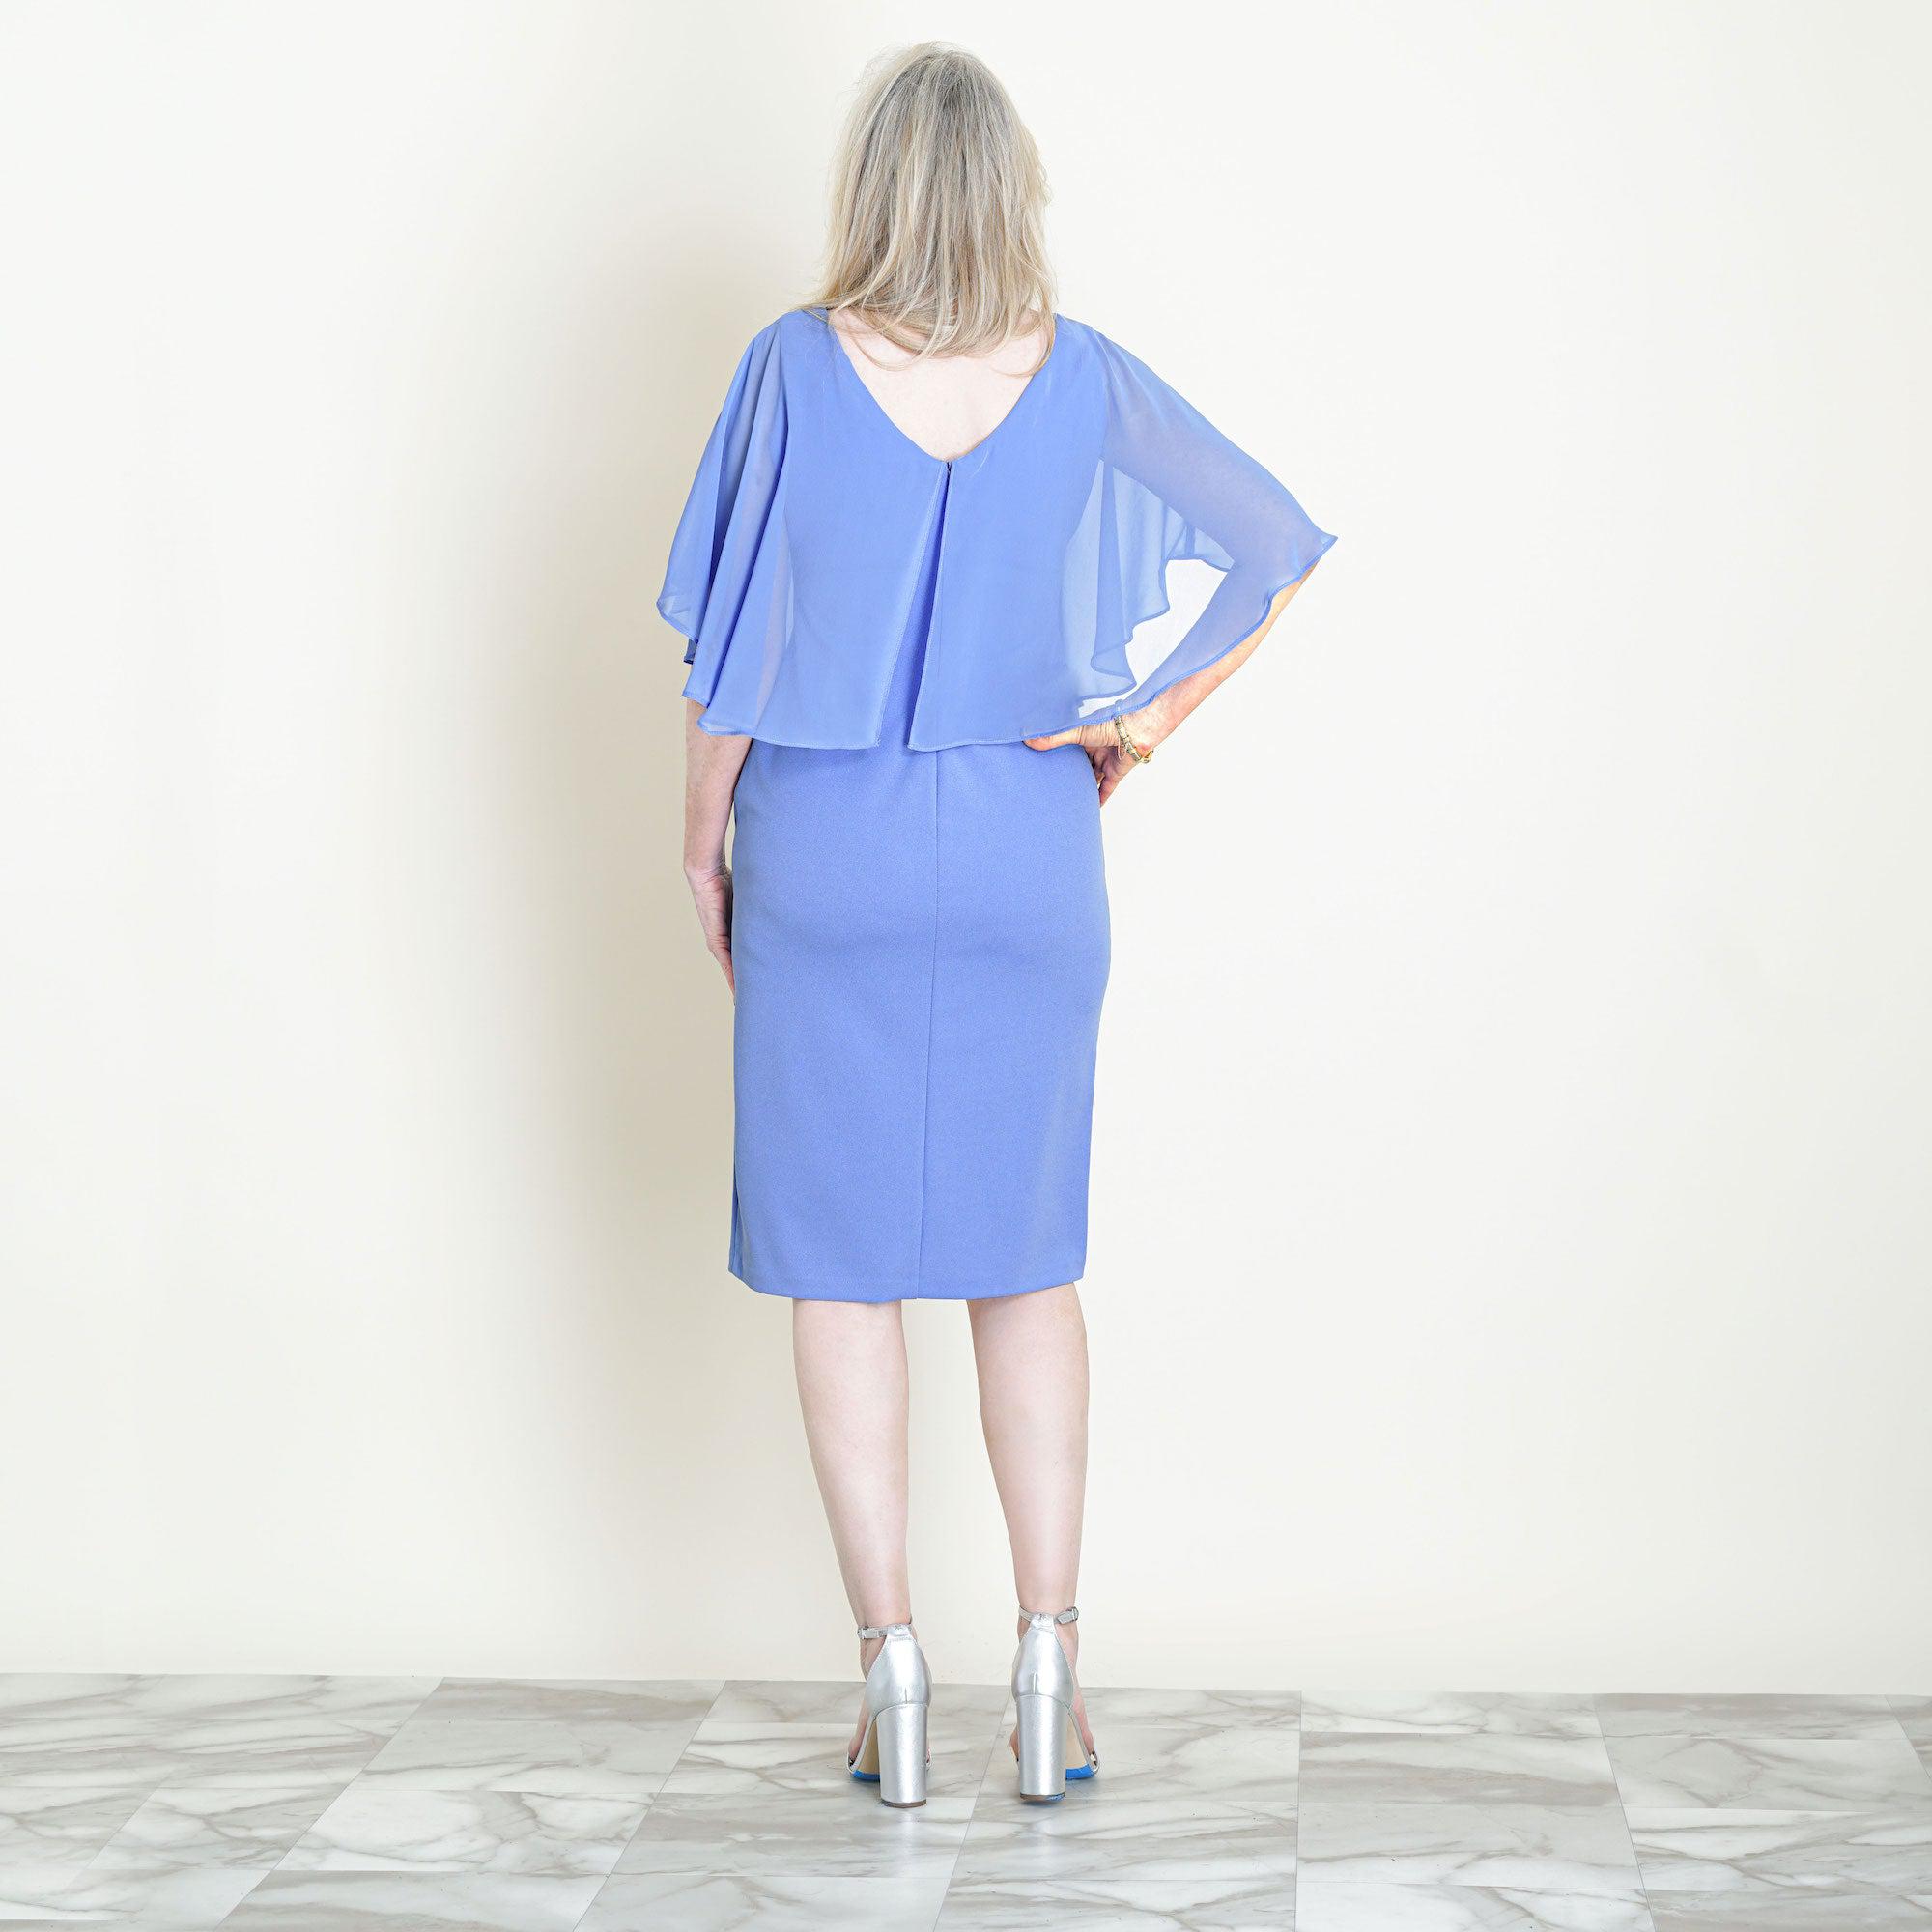 Woman posing wearing New Periwinkle Elsa Periwinkle Midi Capelet Dress from Connected Apparel